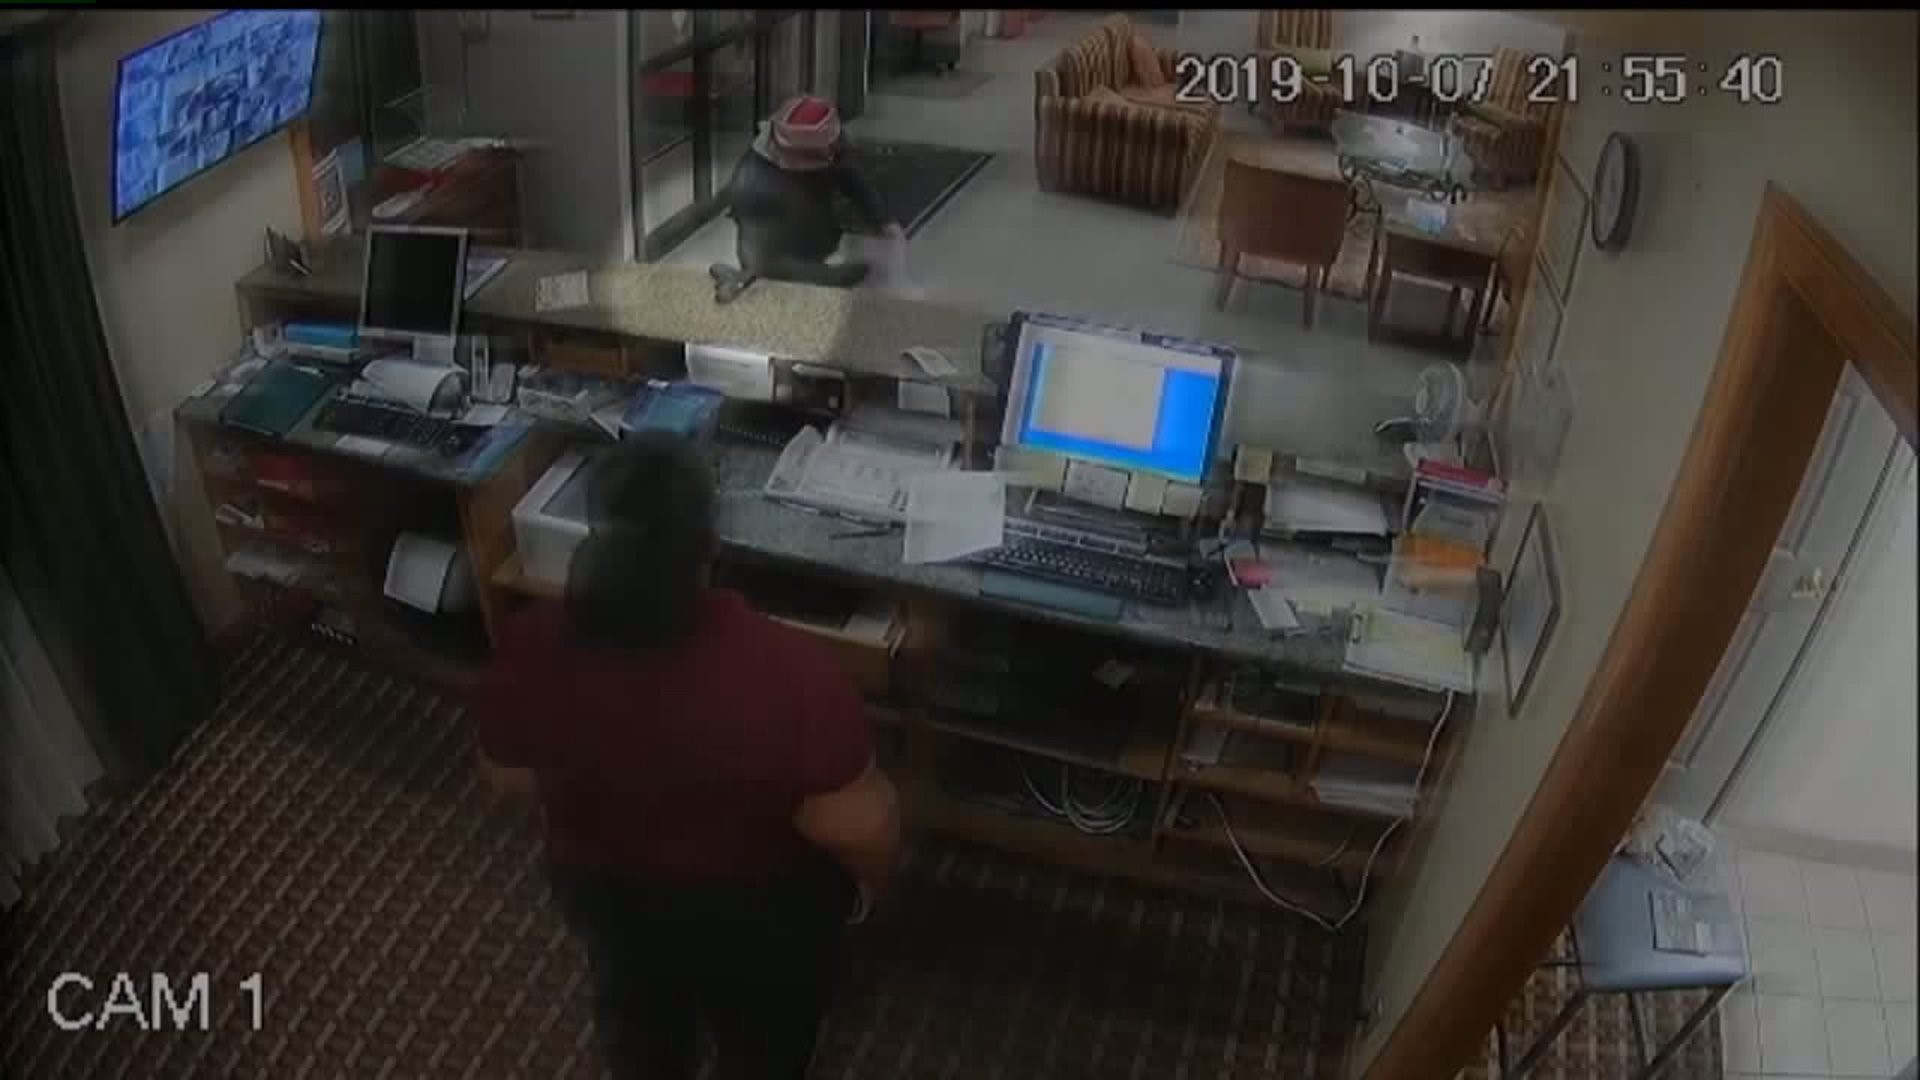 Quick-thinking hotel worker scares off robber with his own gun